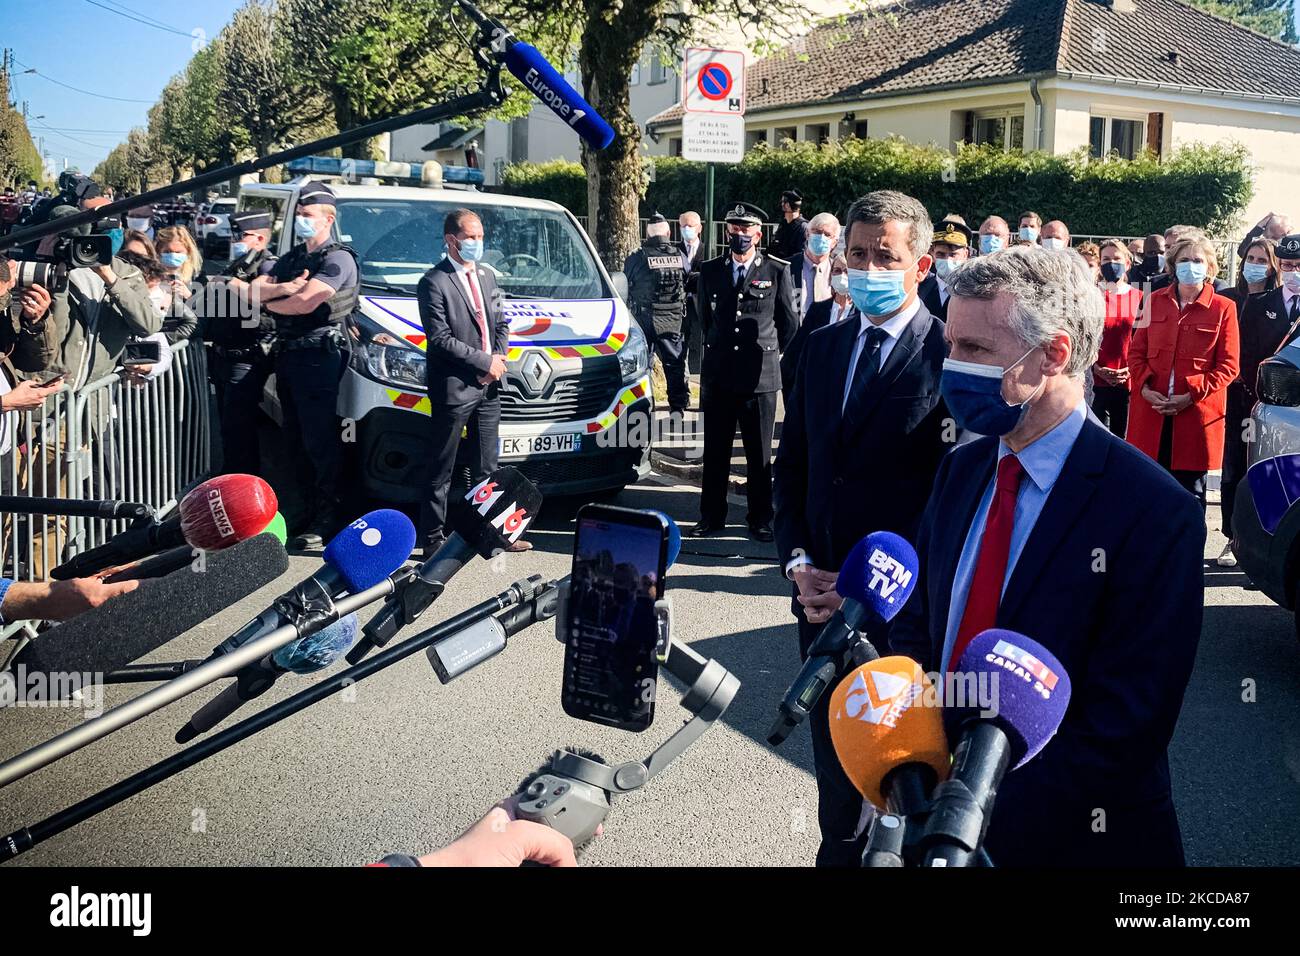 On Friday 23 April 2021, in the middle of the afternoon, a man stabbed a police officer in the entrance of the police station in Rambouillet (Yvelines), a suburb of Paris, before being killed by a police officer. The national anti-terrorist prosecutor's office has taken over the investigation. Prime Minister Jean Castex, Interior Minister Gérald Darmanin and Jean-François Ricard, the prosecutor of the National Anti-Terrorism Prosecutor's Office (PNAT) held a press conference near the scene of the attack. (Photo by Samuel Boivin/NurPhoto) Stock Photo